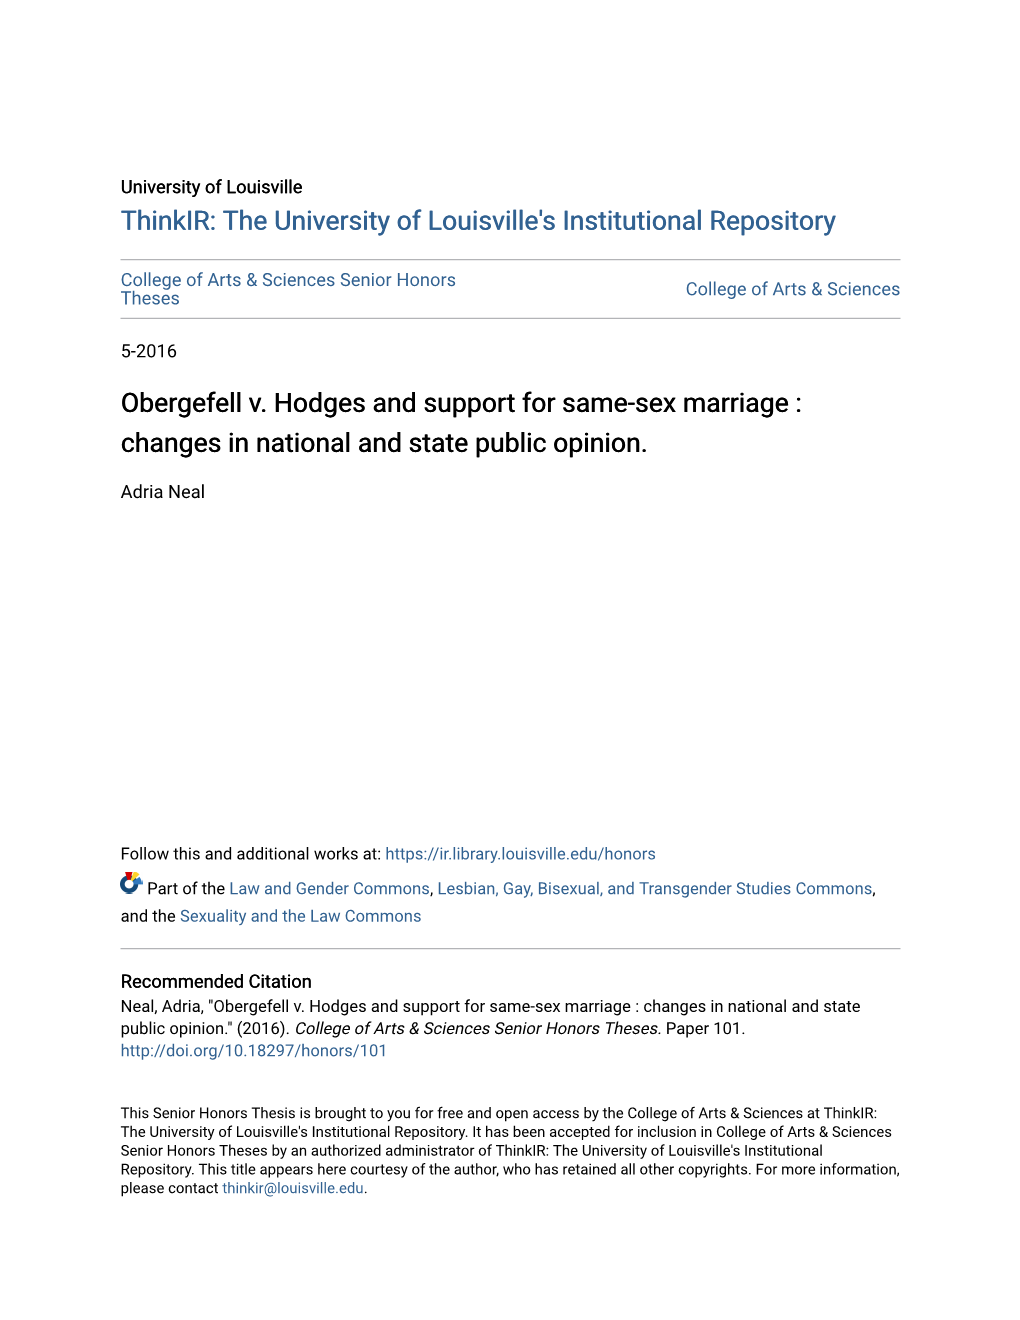 Obergefell V. Hodges and Support for Same-Sex Marriage : Changes in National and State Public Opinion